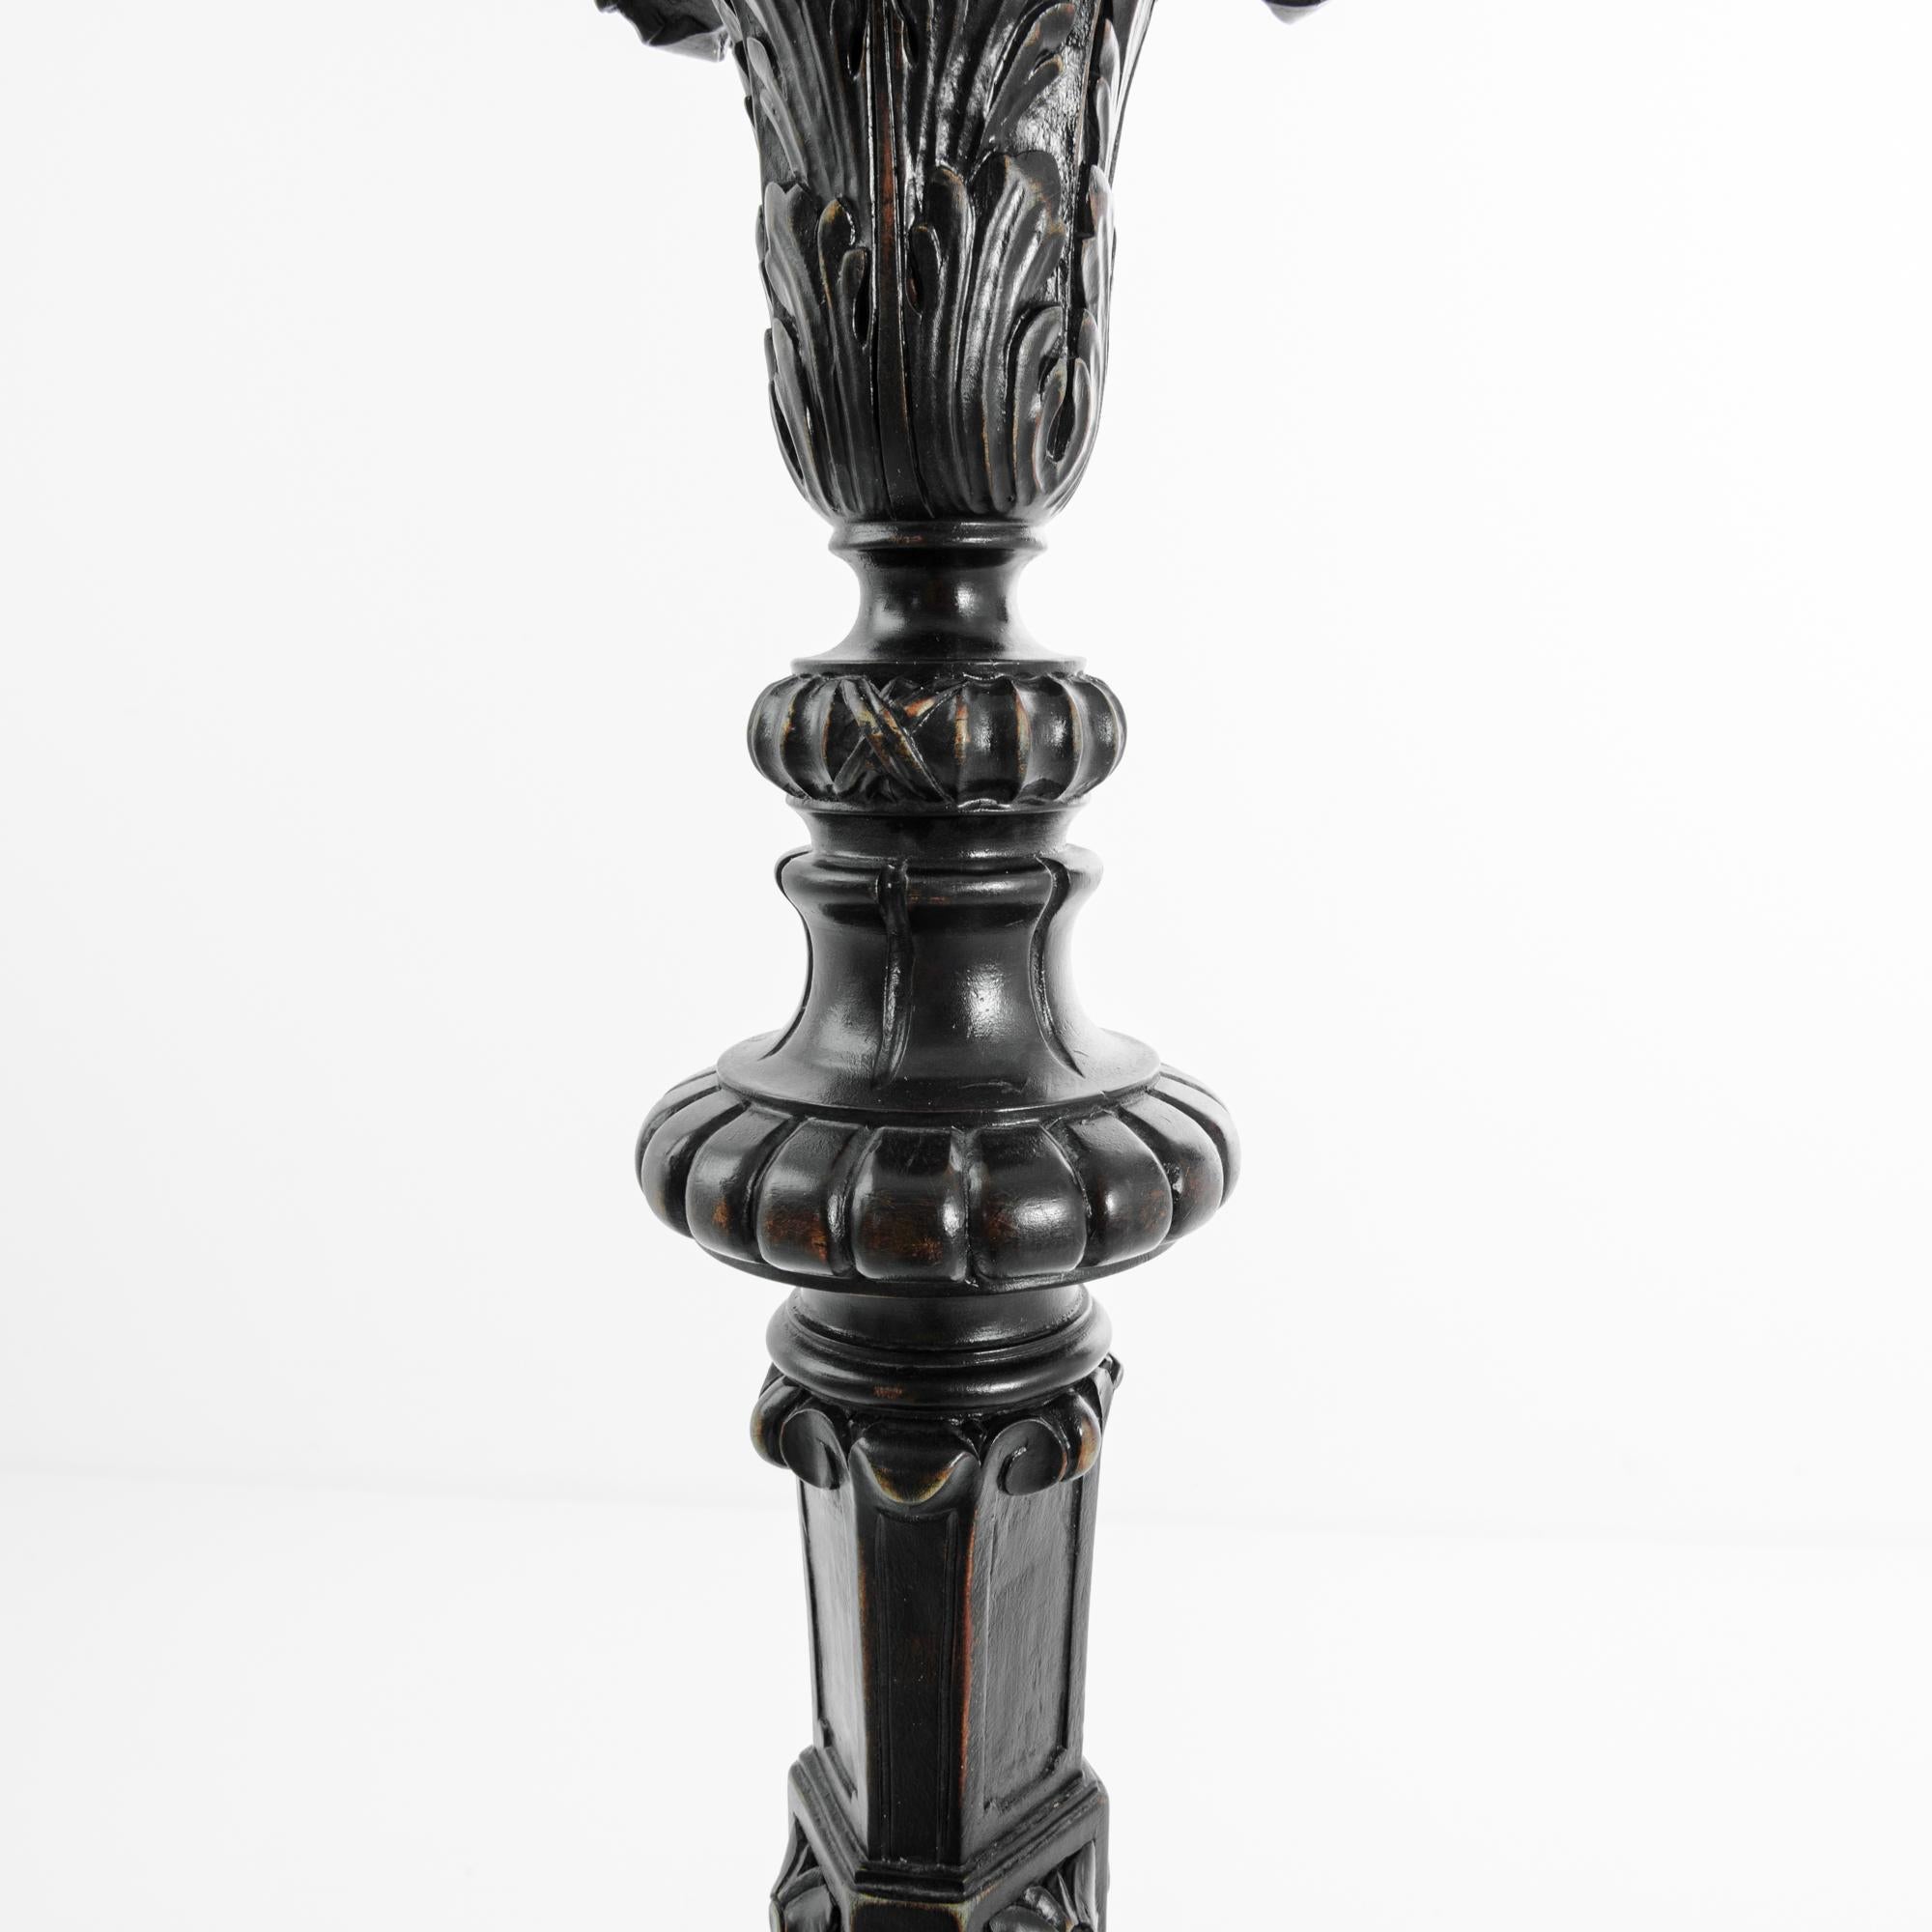 This wooden floor lamp with floral and foliage carvings was made in France, circa 1780. It features a pleasing balance of curves and angular forms, ornamented with acanthus scrolls and gadroons that hint at a neoclassical influence. Tripod legs with